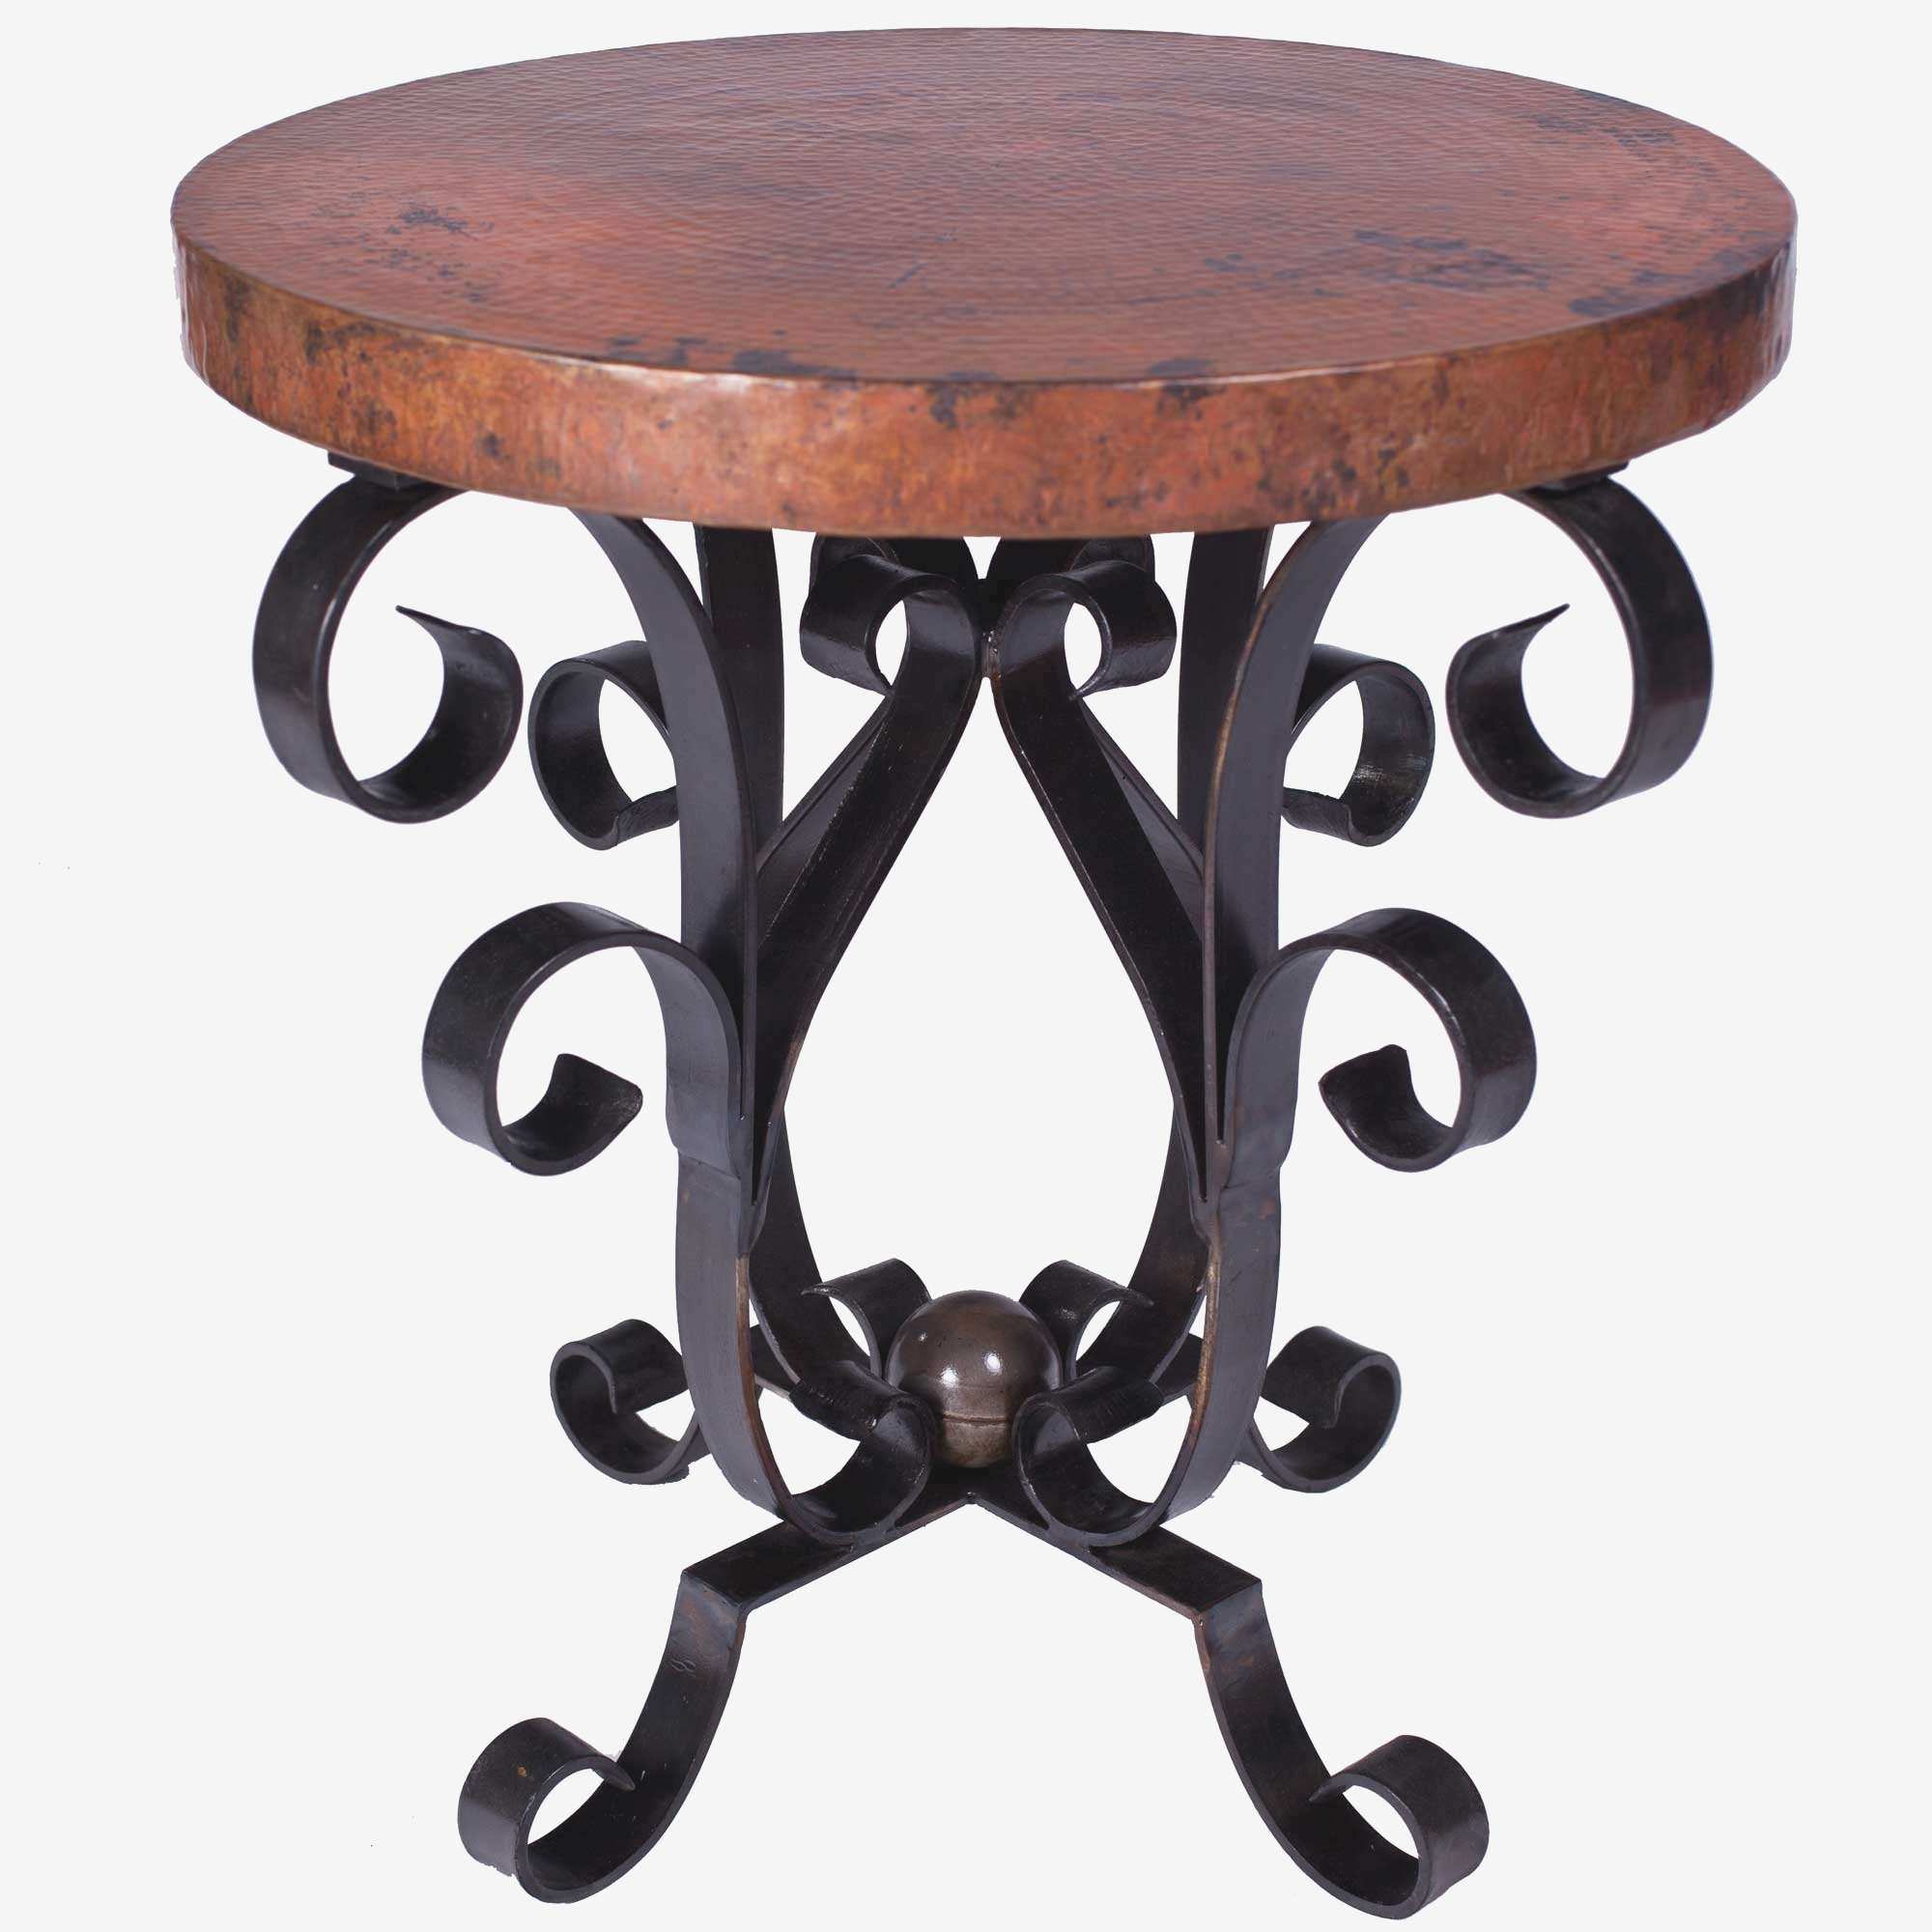 wrought iron accent table terrific scroll with hammered copper top wallpaper metal target white comforter diy sliding door sofa crate side gaming media console aluminum patio